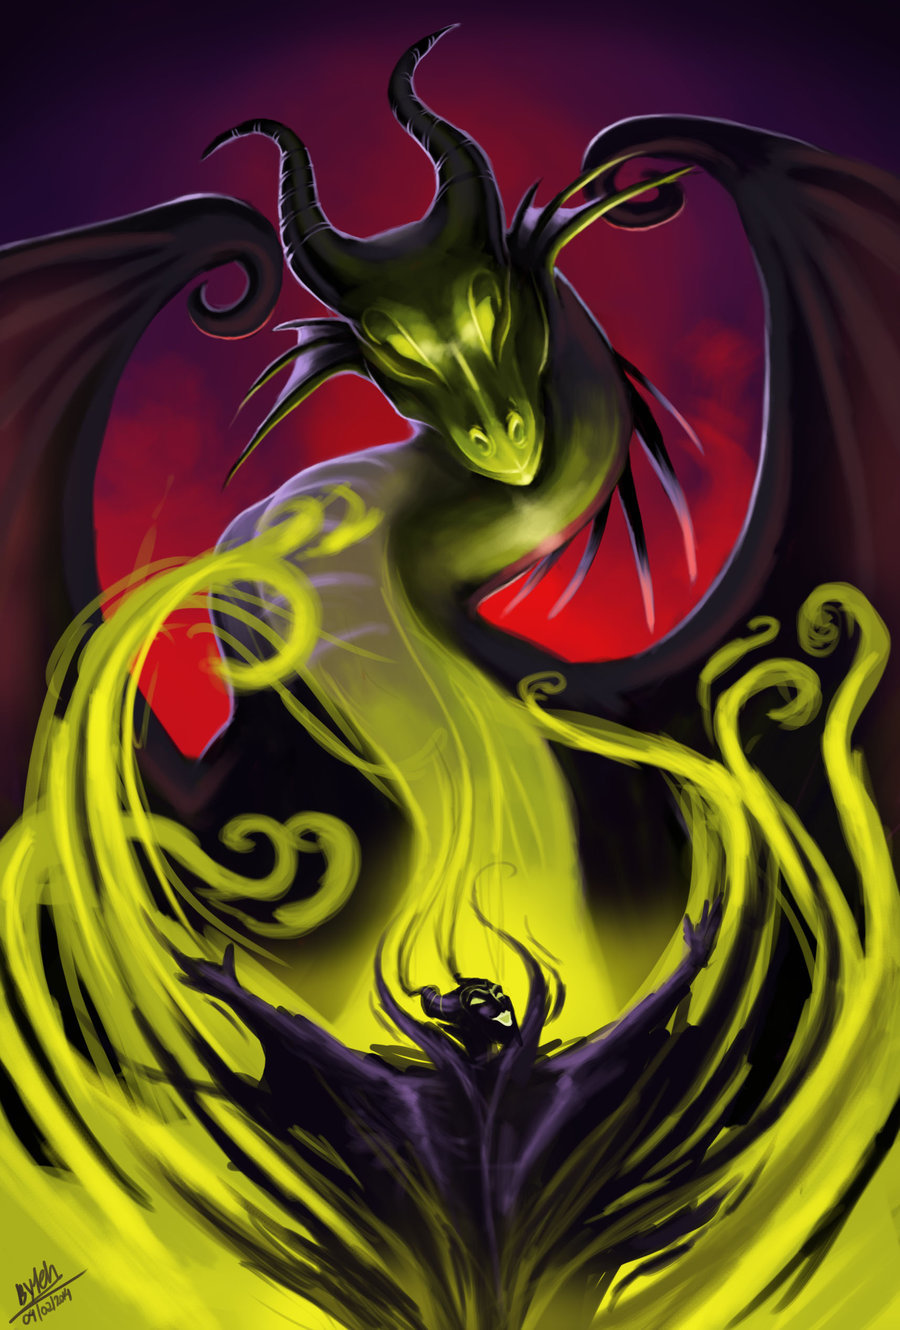 thetygre:
“Maleficent by TehChan
”
“Now shall you deal with me, o prince, and all the powers of hell!”